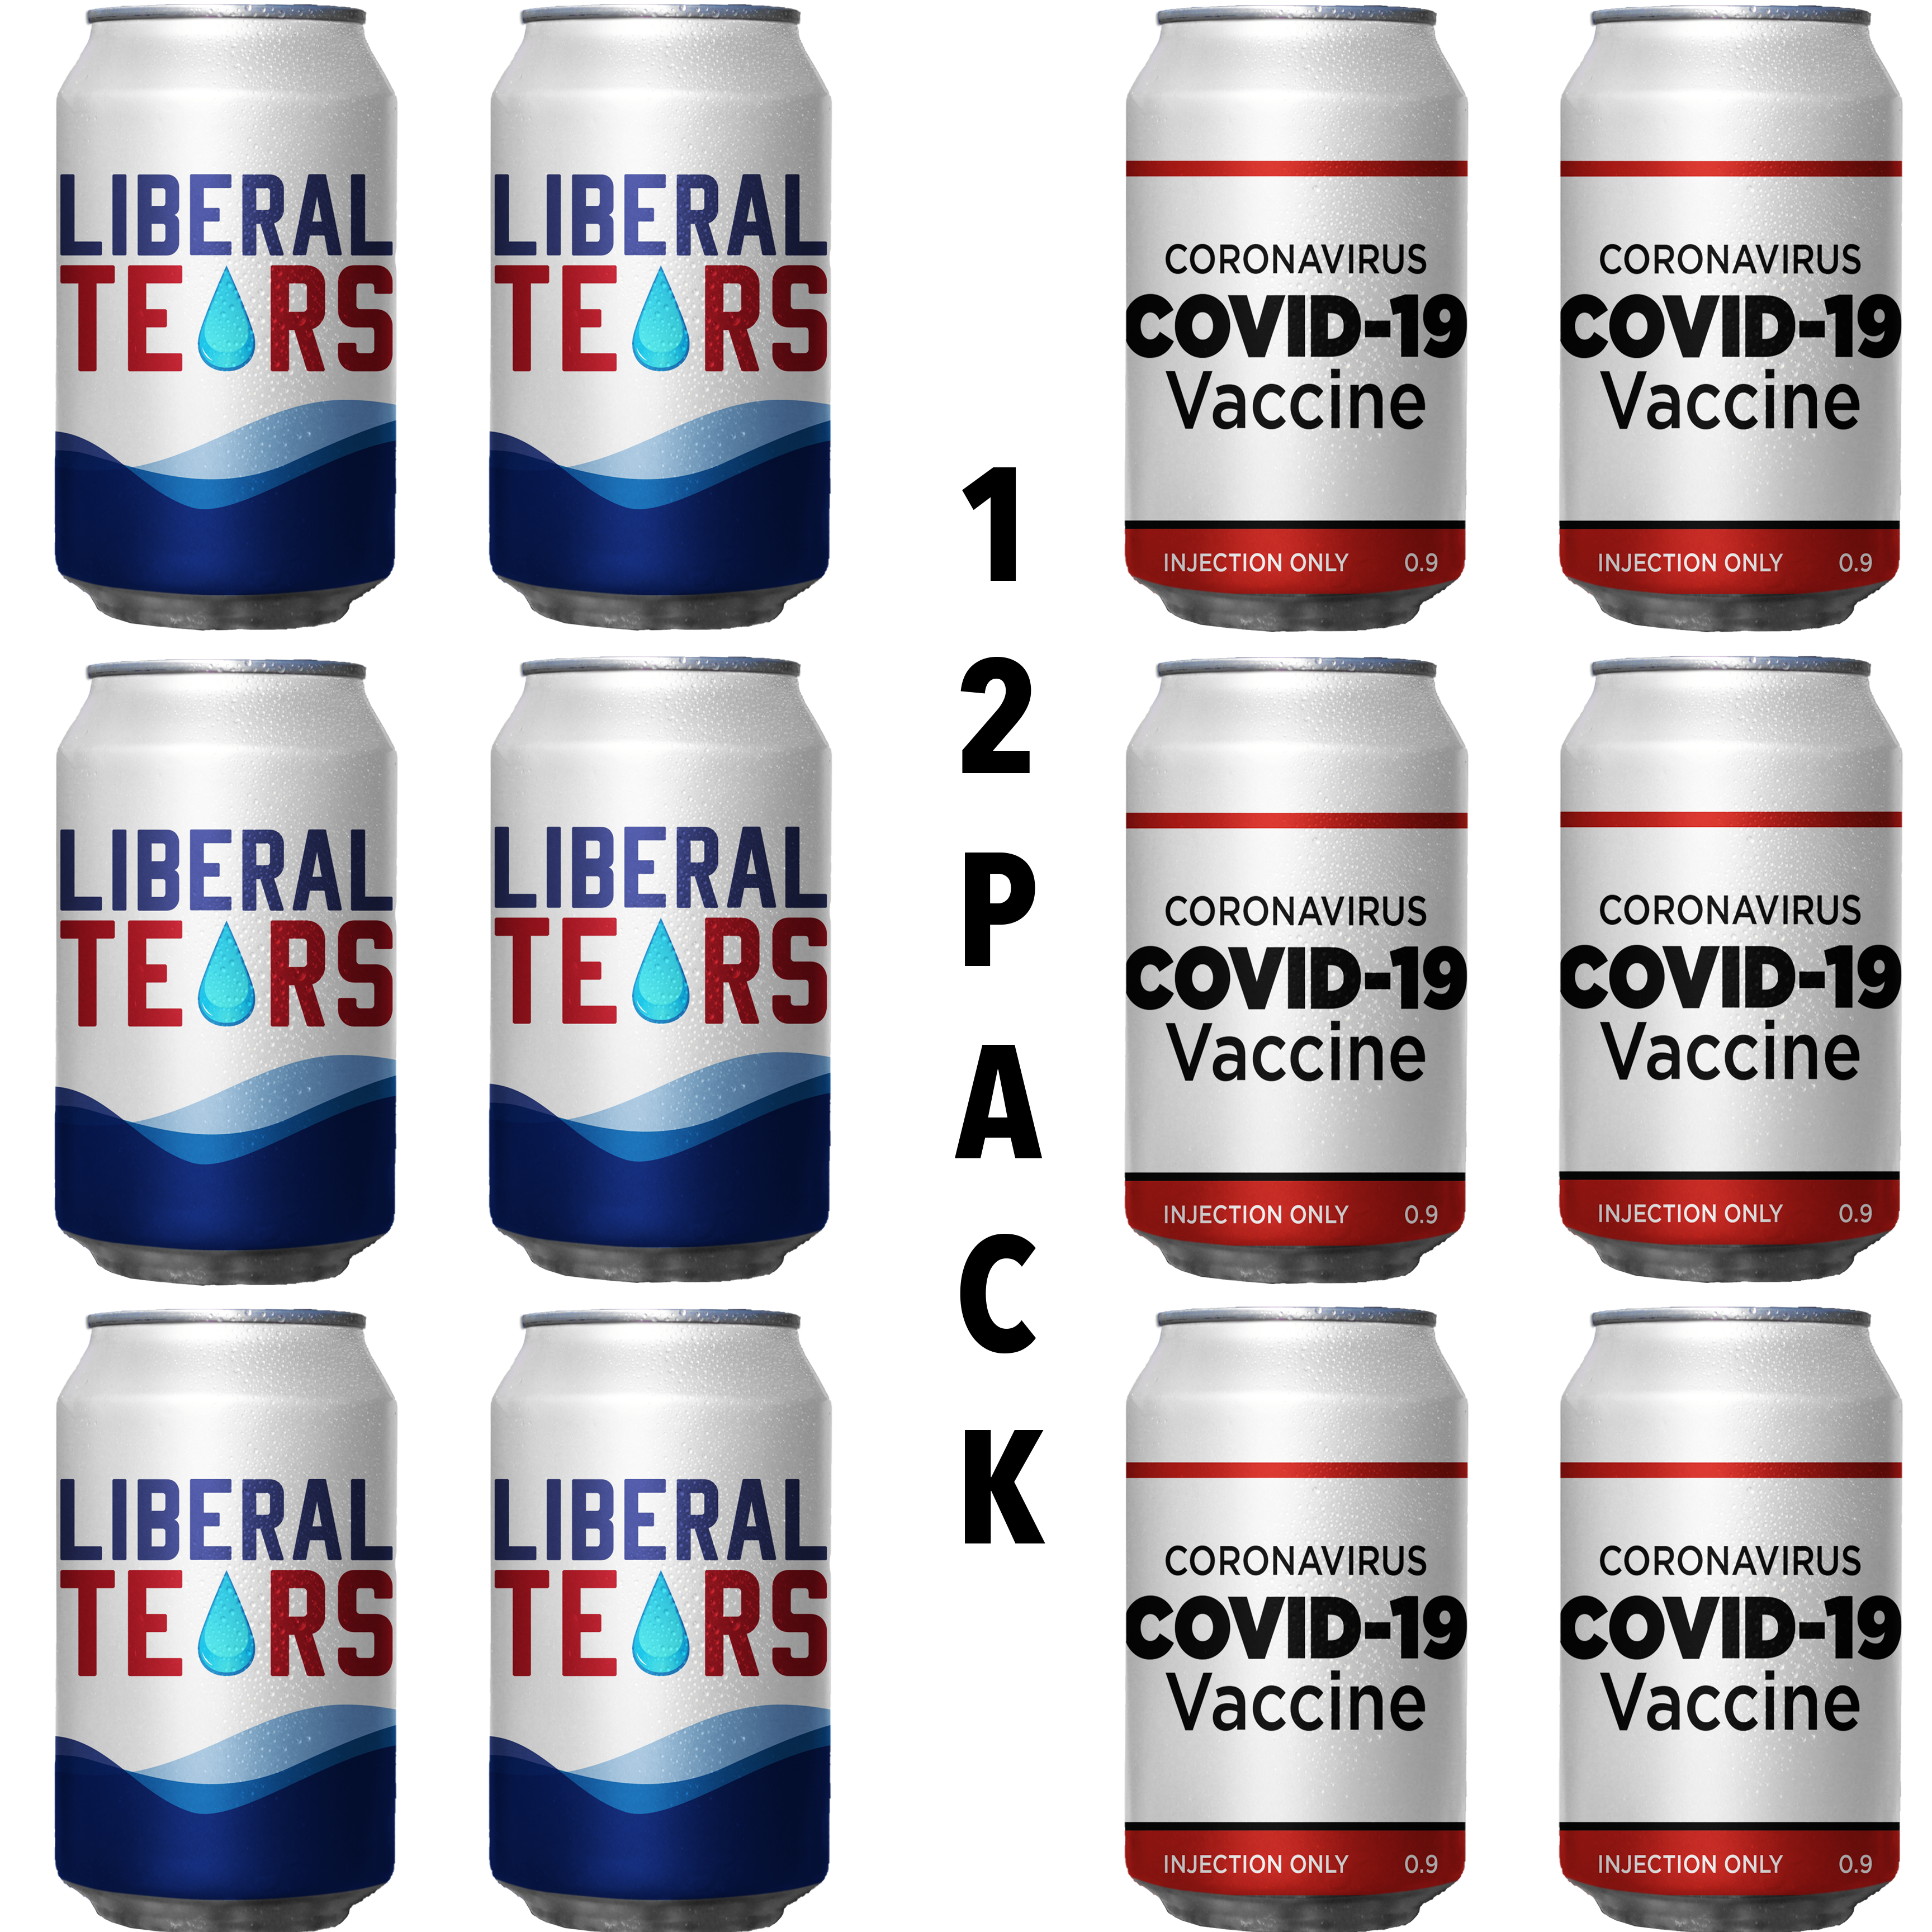 Beersy 12 Pack Variety (Liberal Tears & Covid-19 Vaccine)